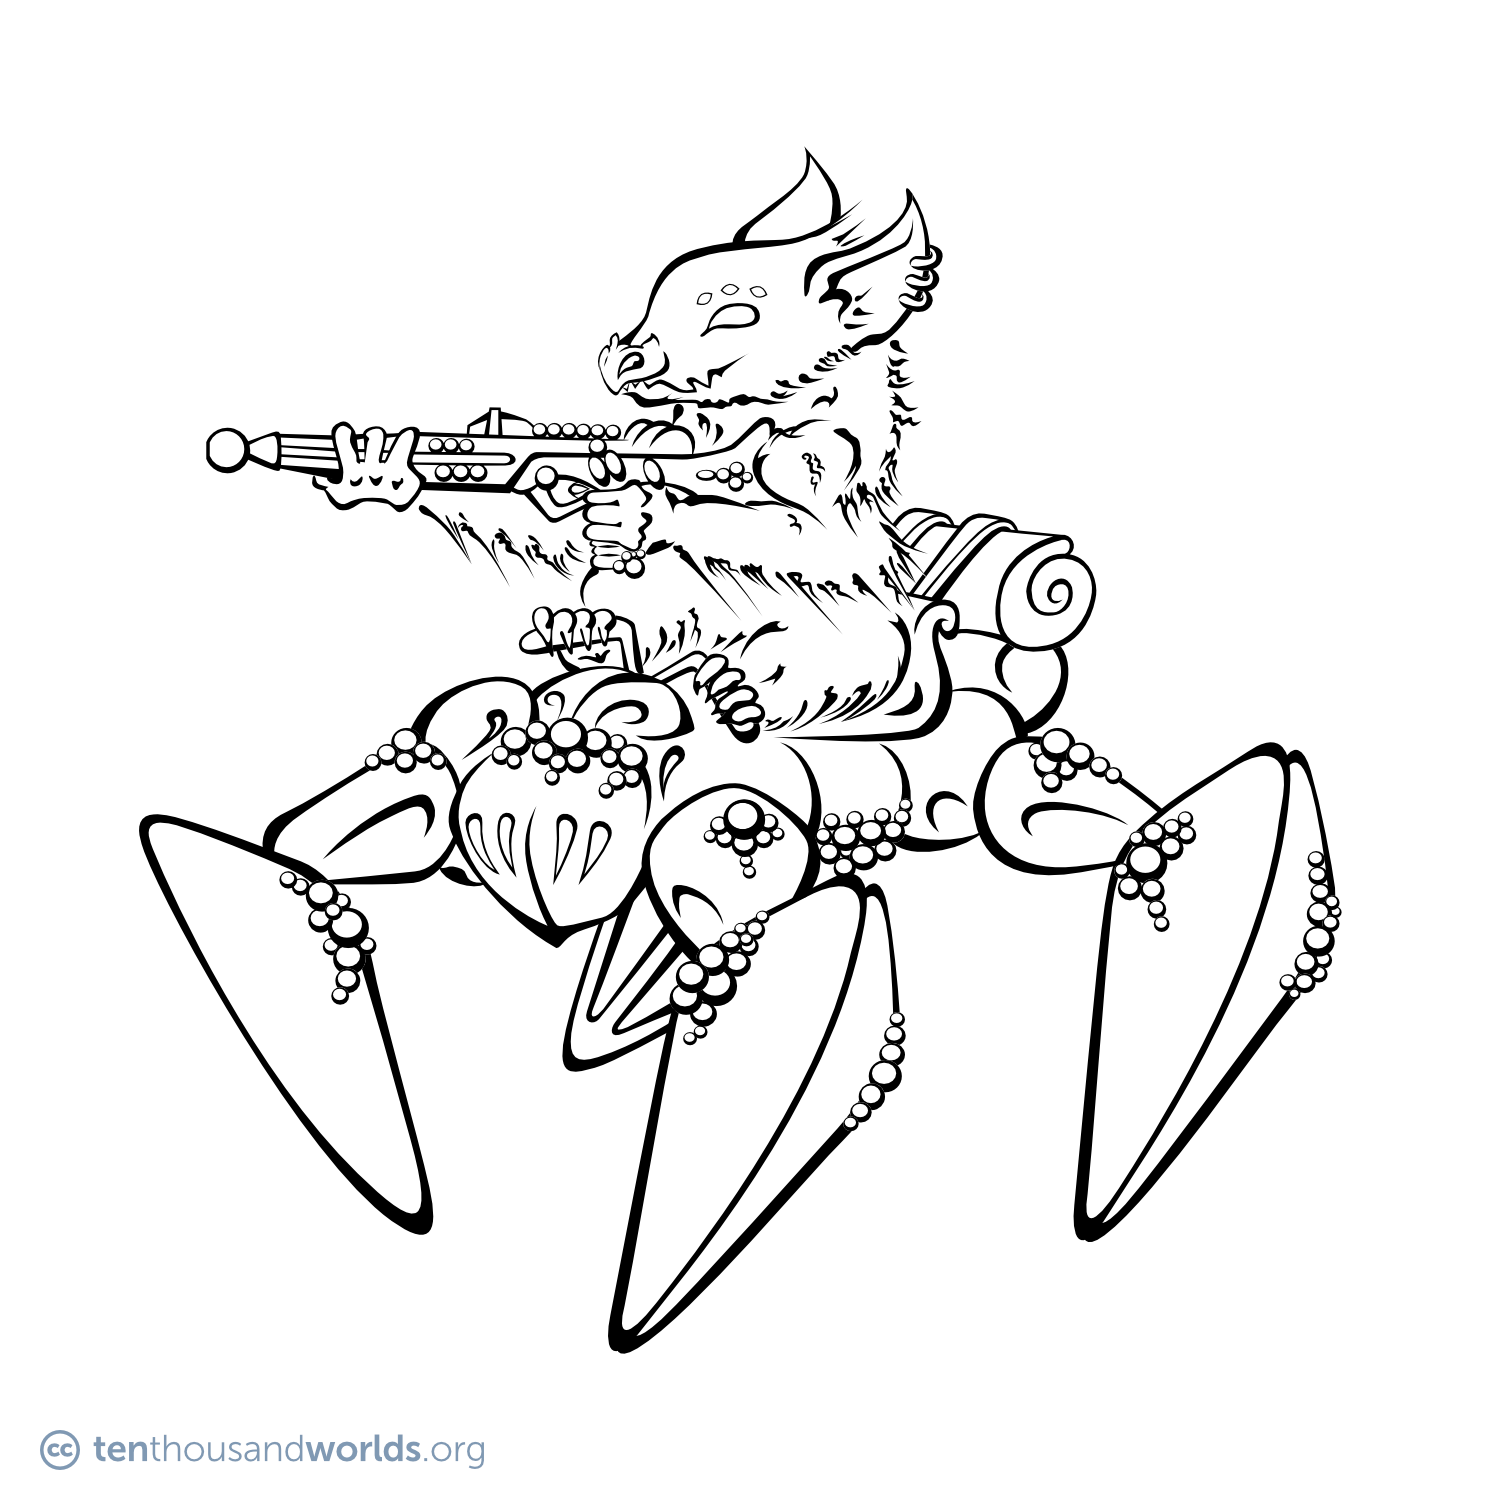 An ink outline of a creature like a long-furred koala with a bat-like face rides a four-legged insect-shaped machine, holding a rifle in its fore-paws and steering with its hind-paws.